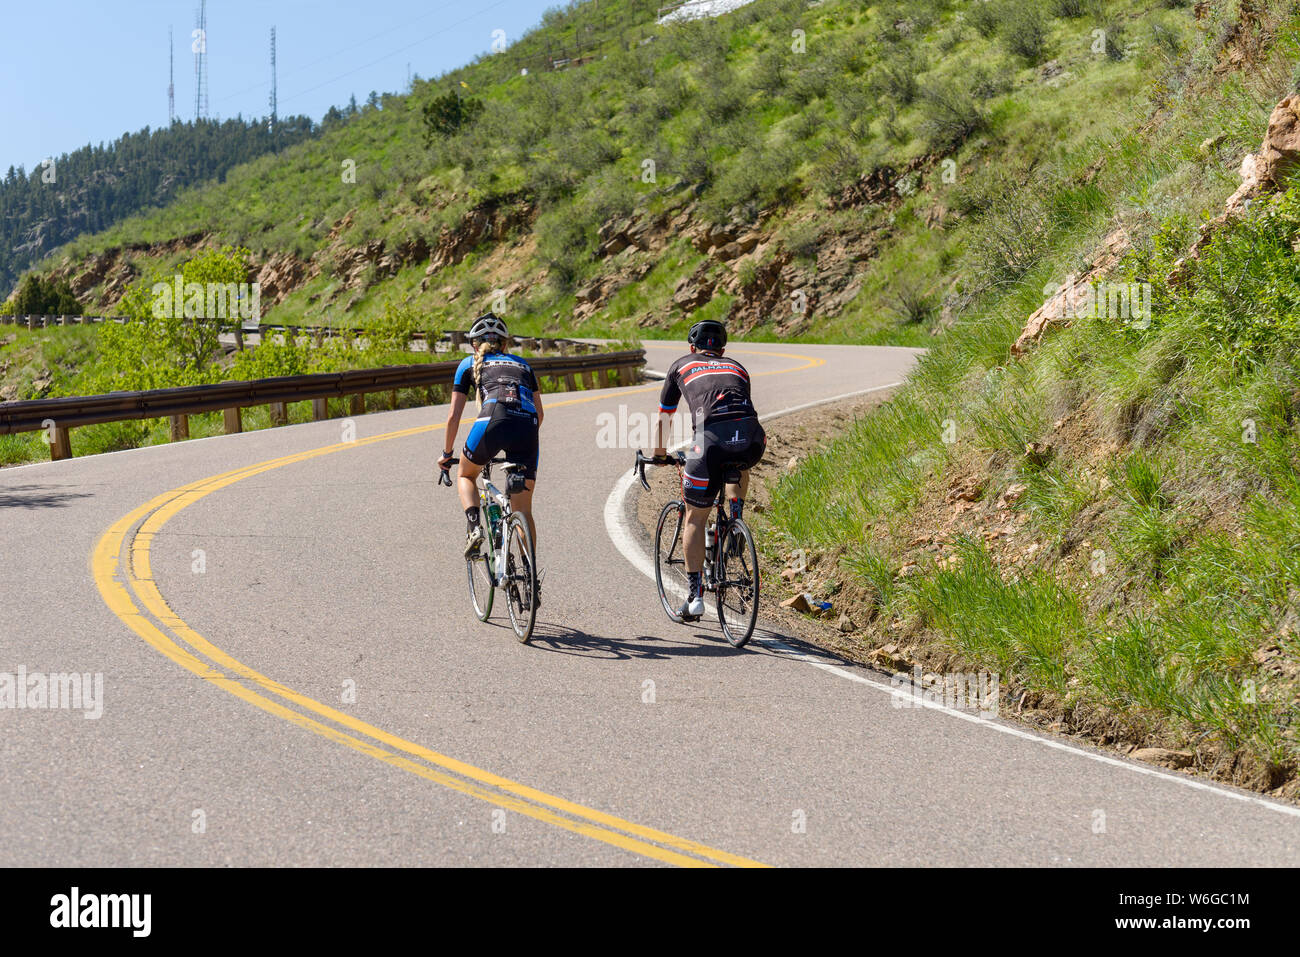 Mountain Biking - Cyclists climbing up a steep and winding mountain road at Lookout Mountain near city of Golden, Colorado, USA. Stock Photo